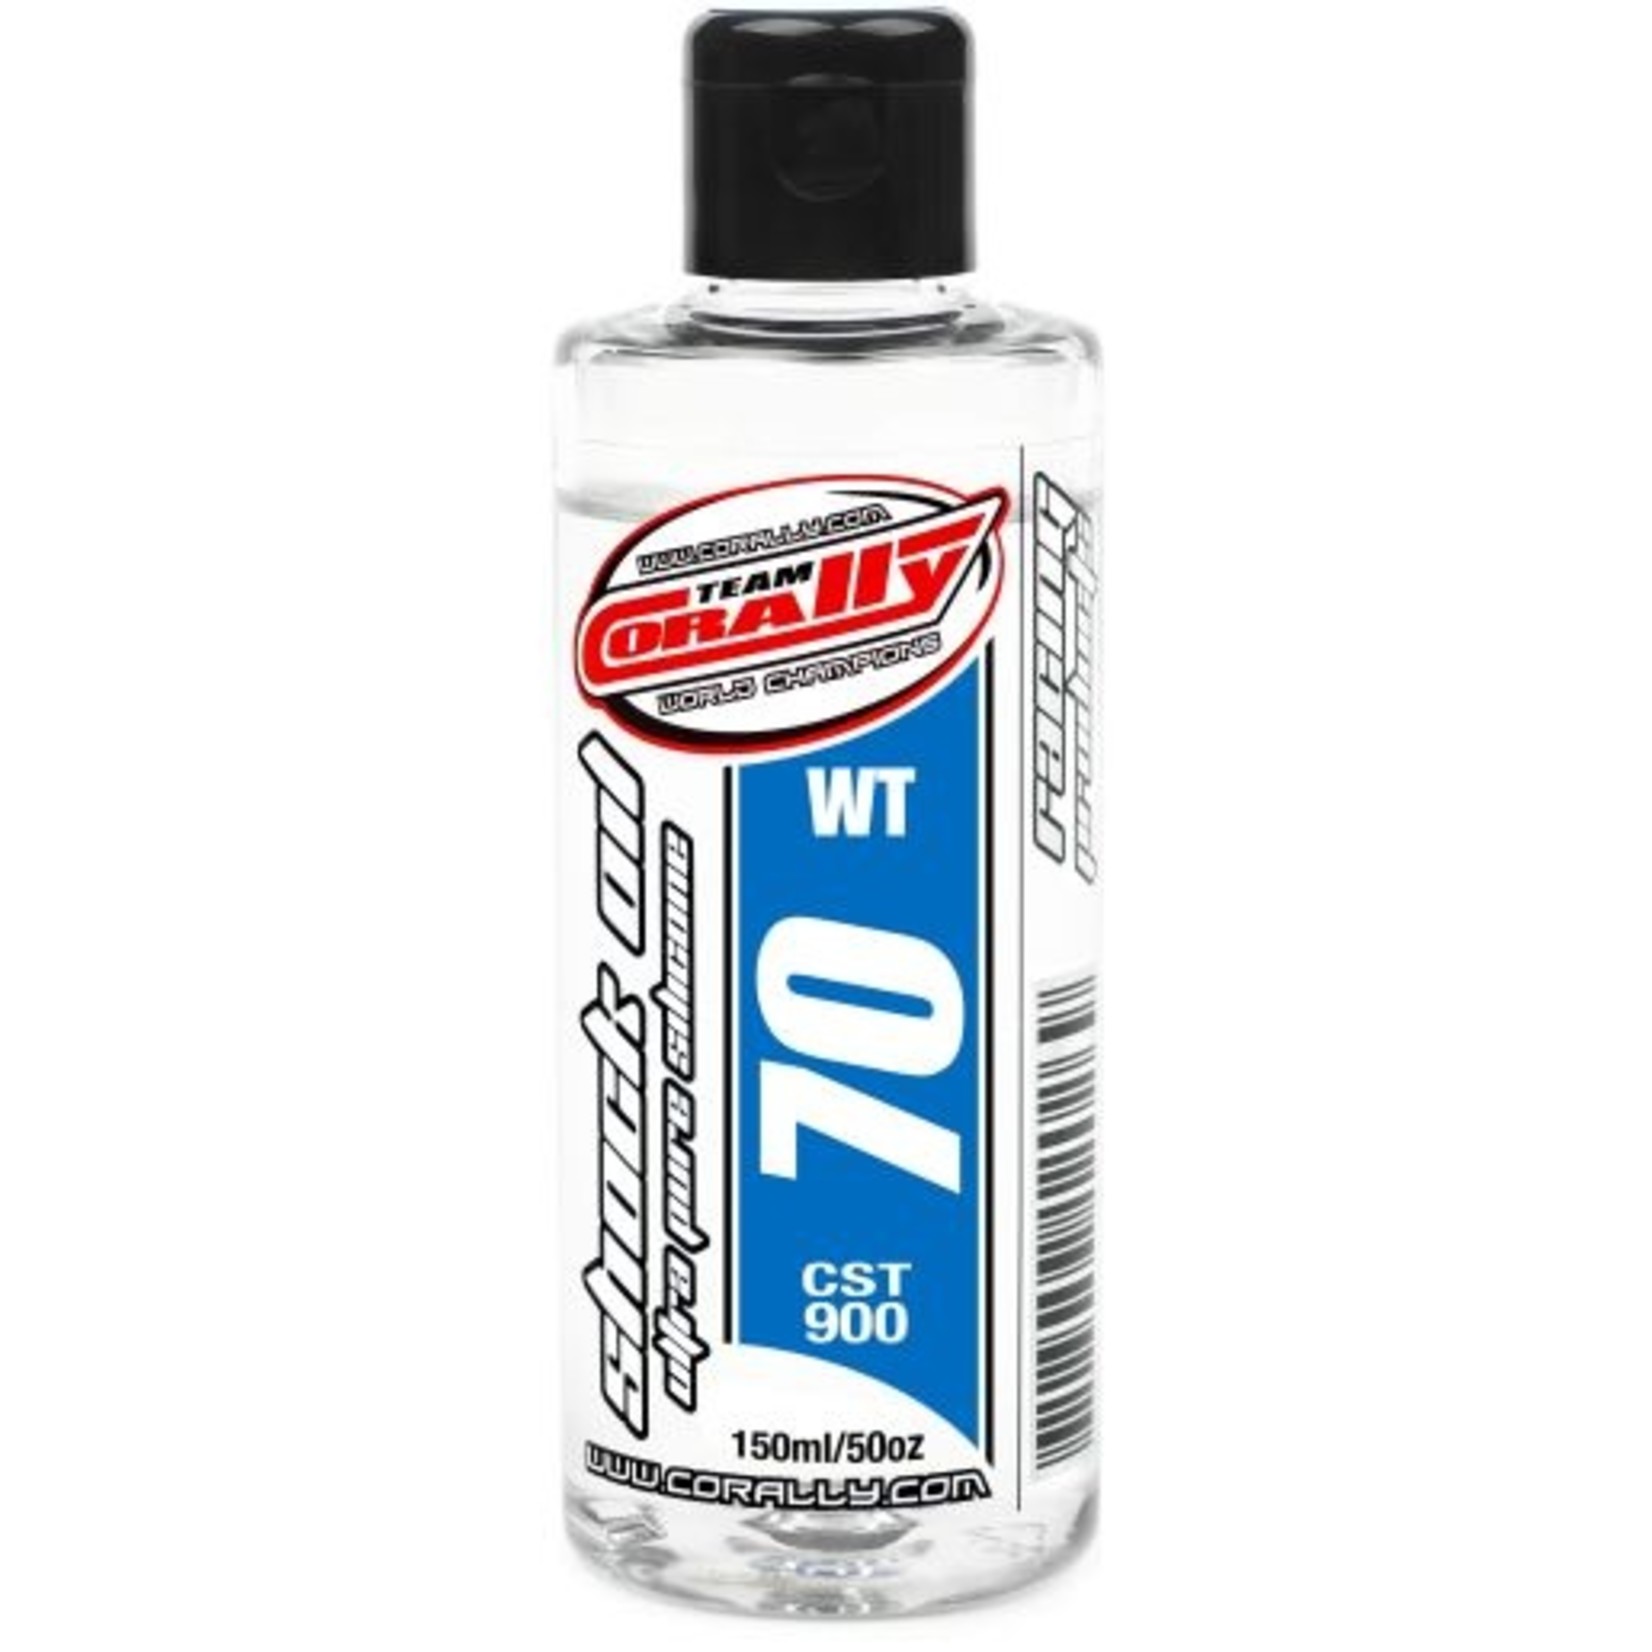 Corally (Team Corally) Ultra Pure Silicone Shock Oil - 70 WT - 150ml